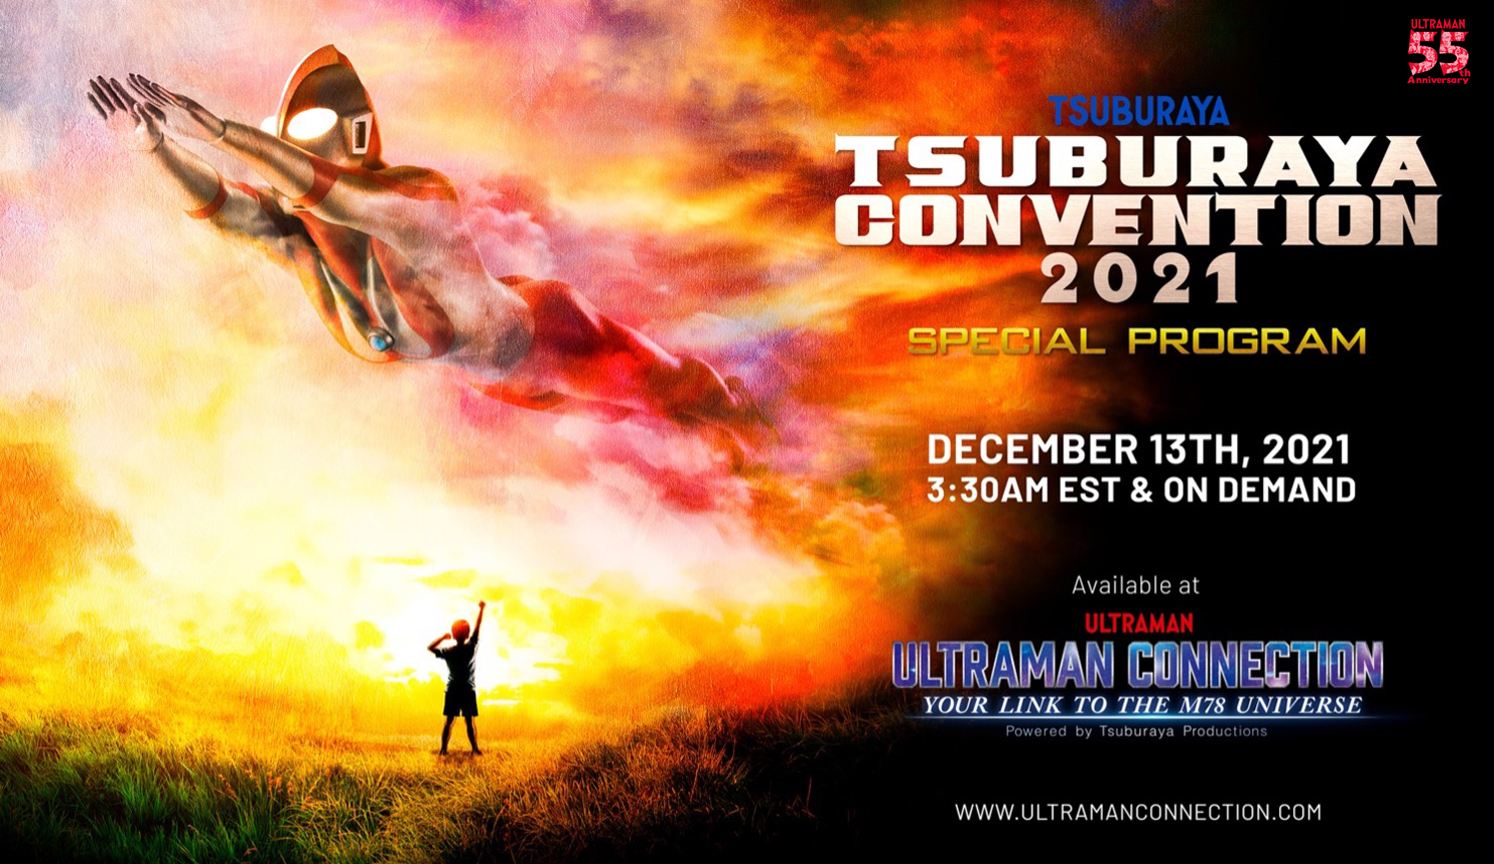 TSUBURAYA CONVENTION 2021 TO PRESENT FREE ONLINE SPECIAL PROGRAM